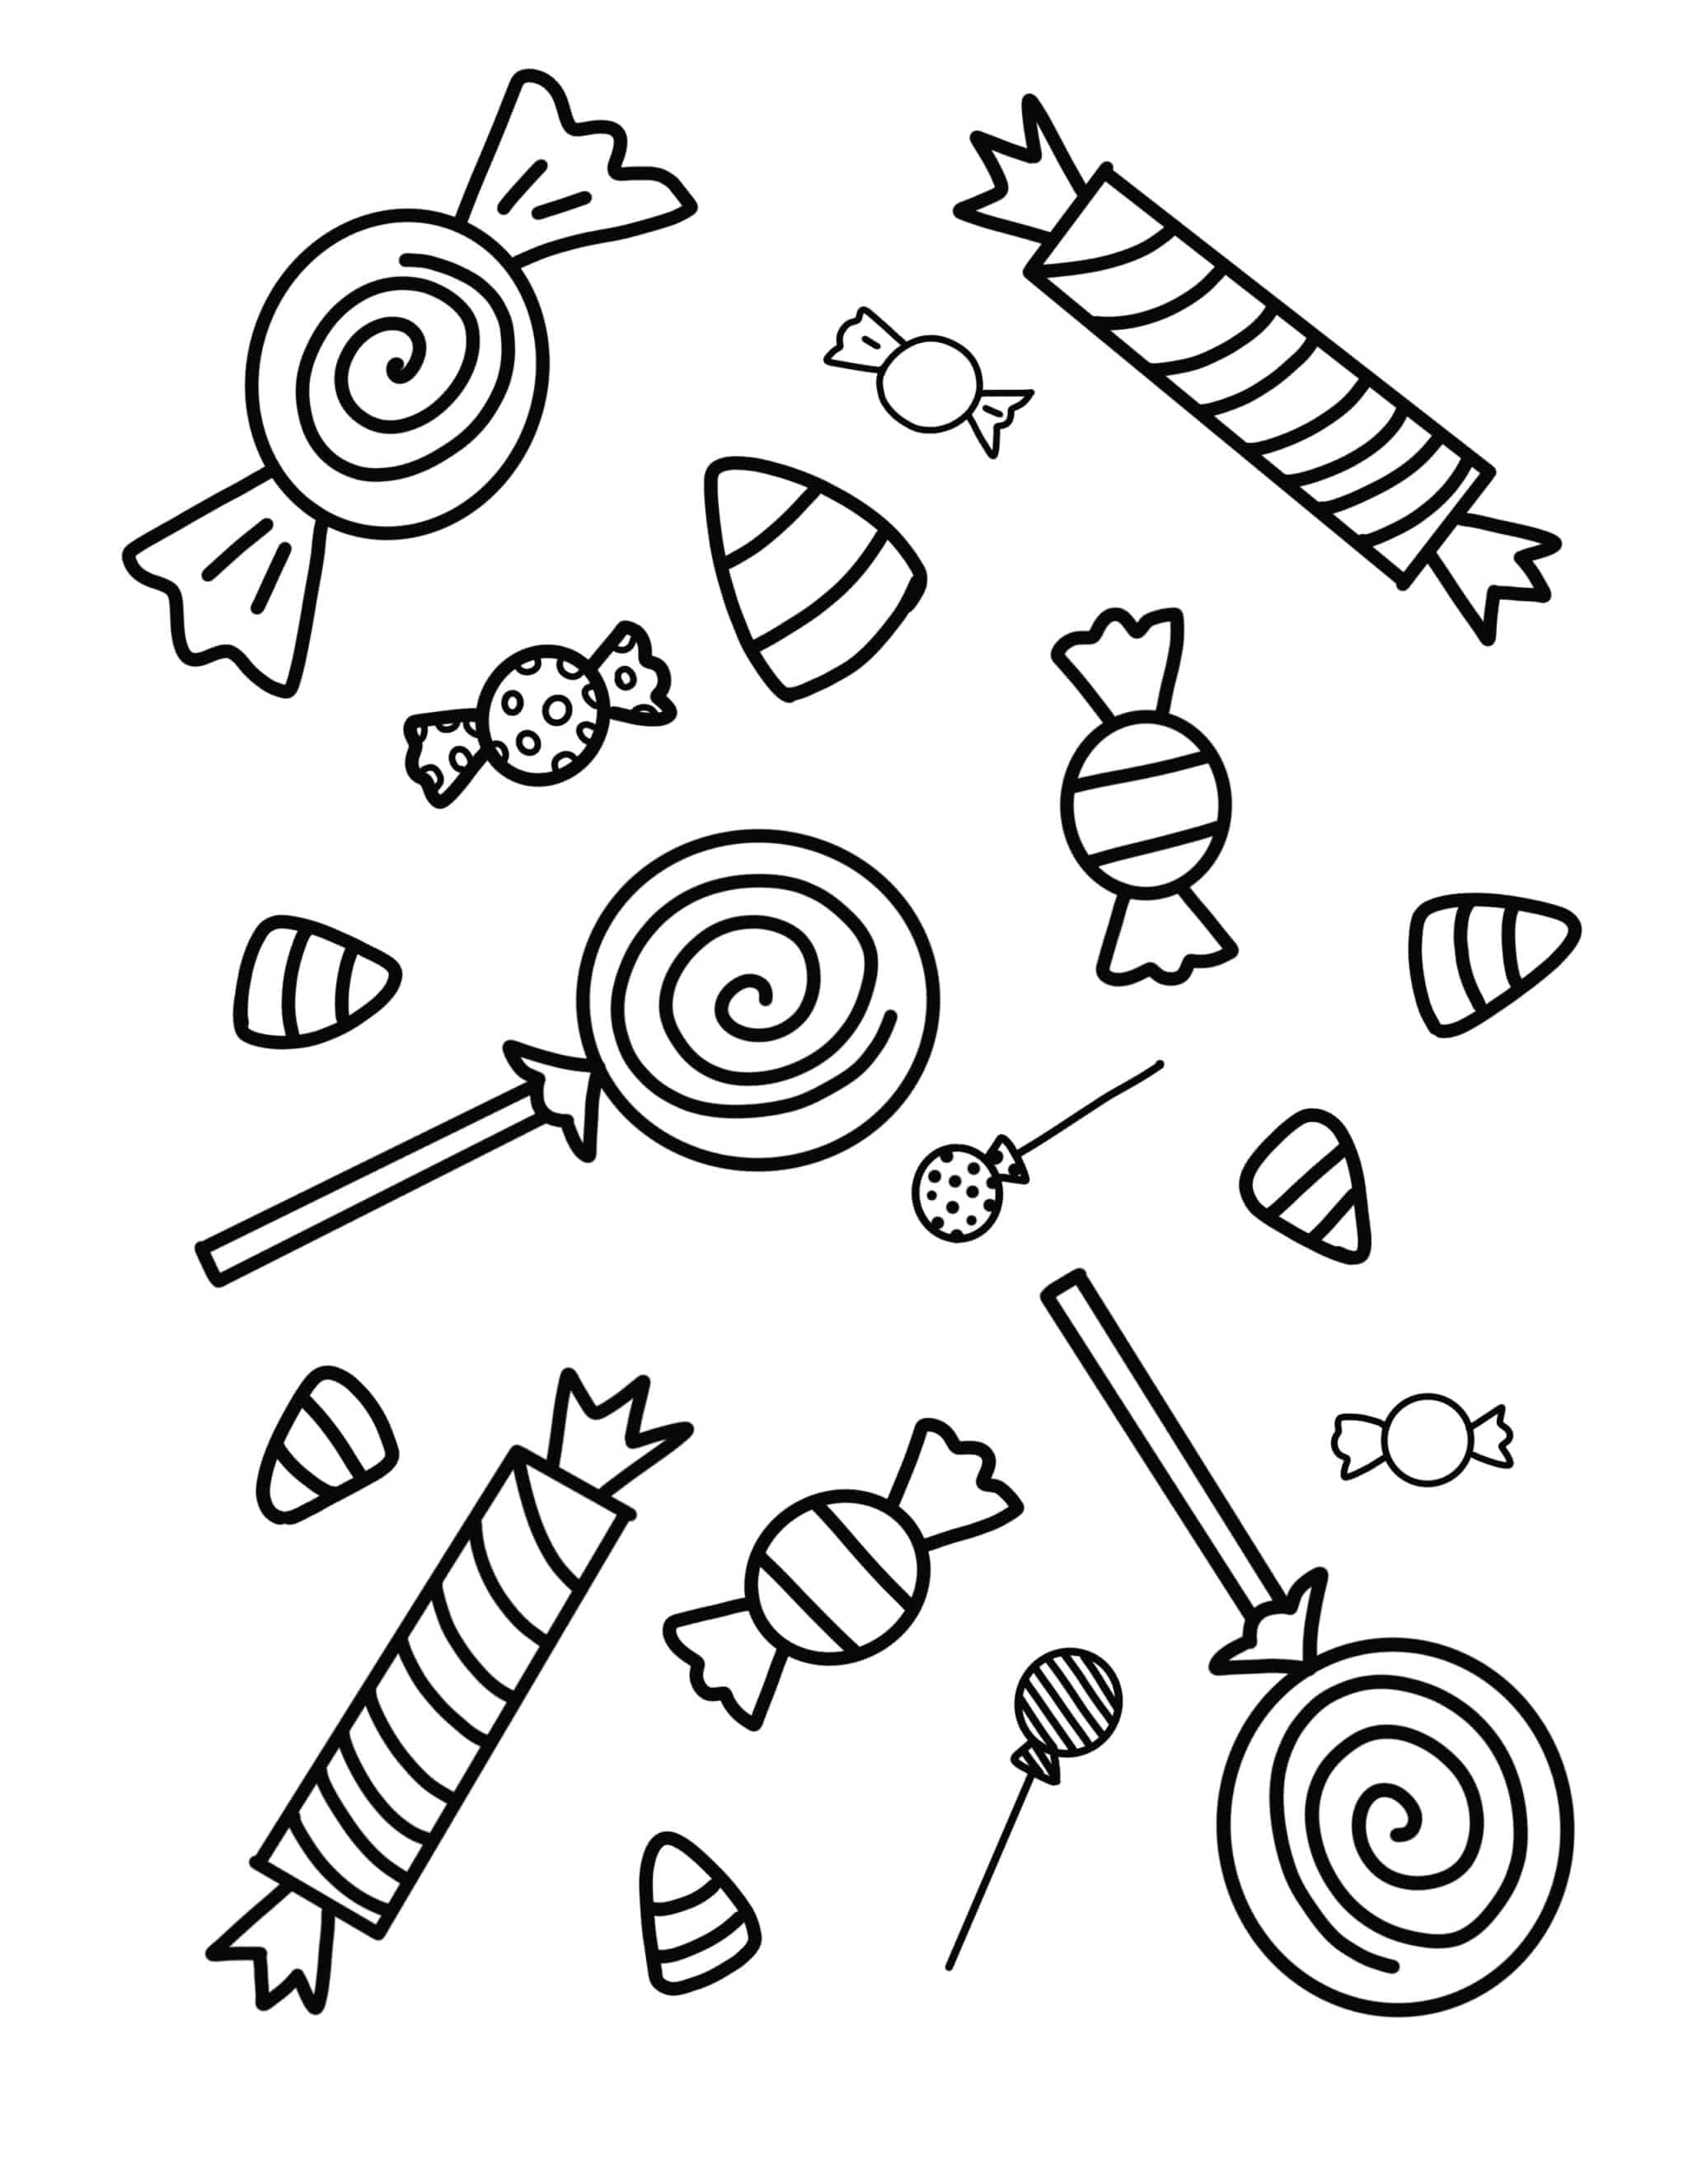 Happy halloween free halloween coloring page